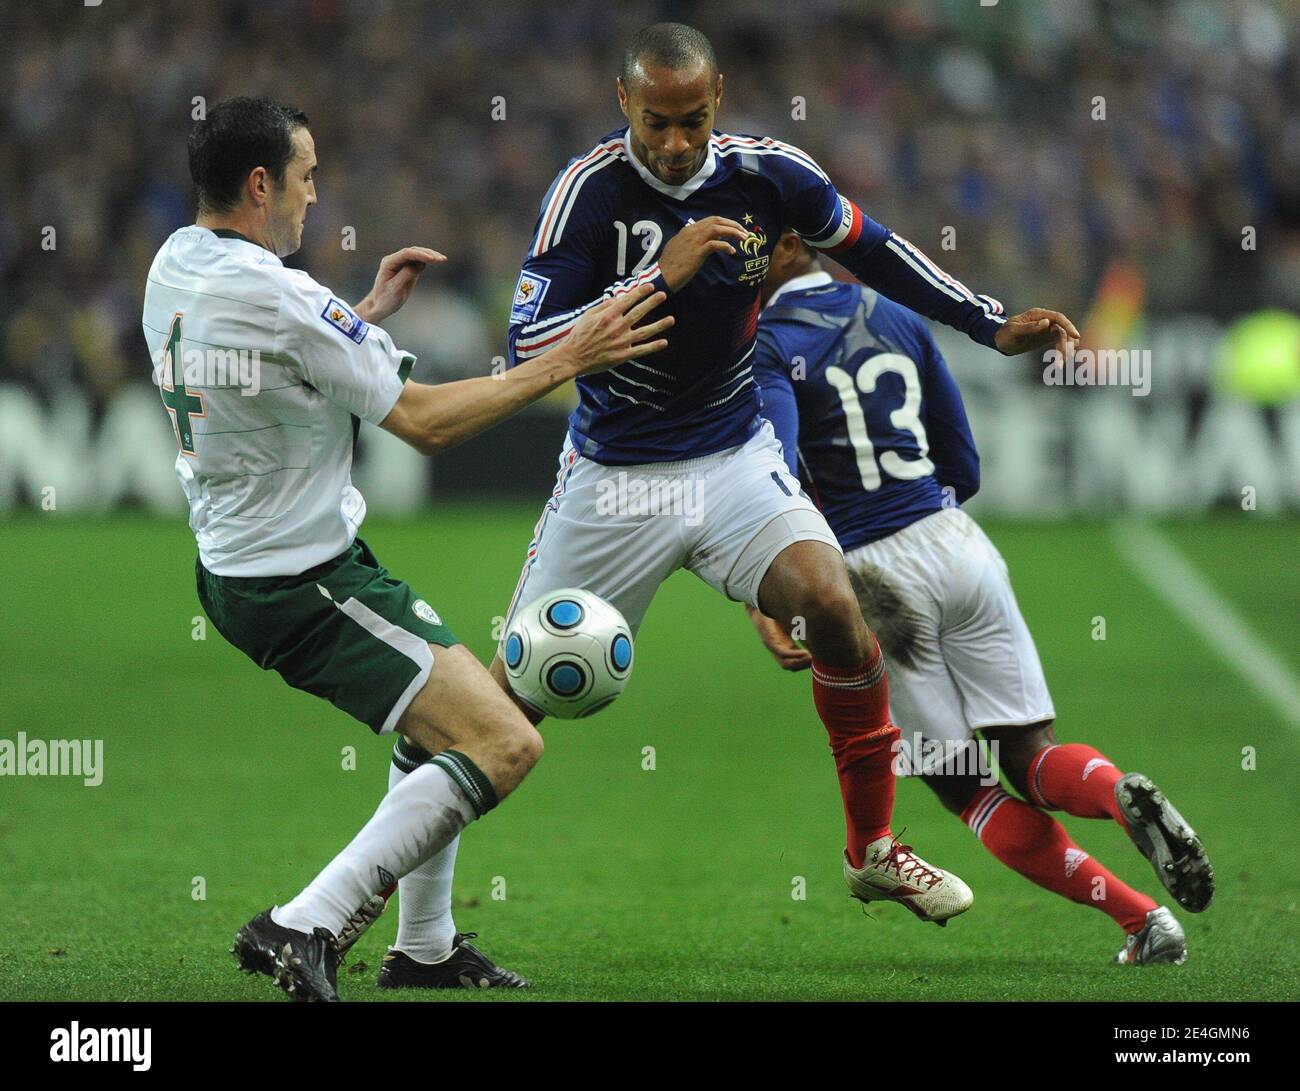 France's Thierry Henry during World Cup Play-off soccer match, France vs Republic of Ireland at Stade de France in Saint-Denis near Paris, France on November 18, 2009. The Match ended in a 1-1 draw. Photo by Christian Liewig/ABACAPRESS.COM Stock Photo